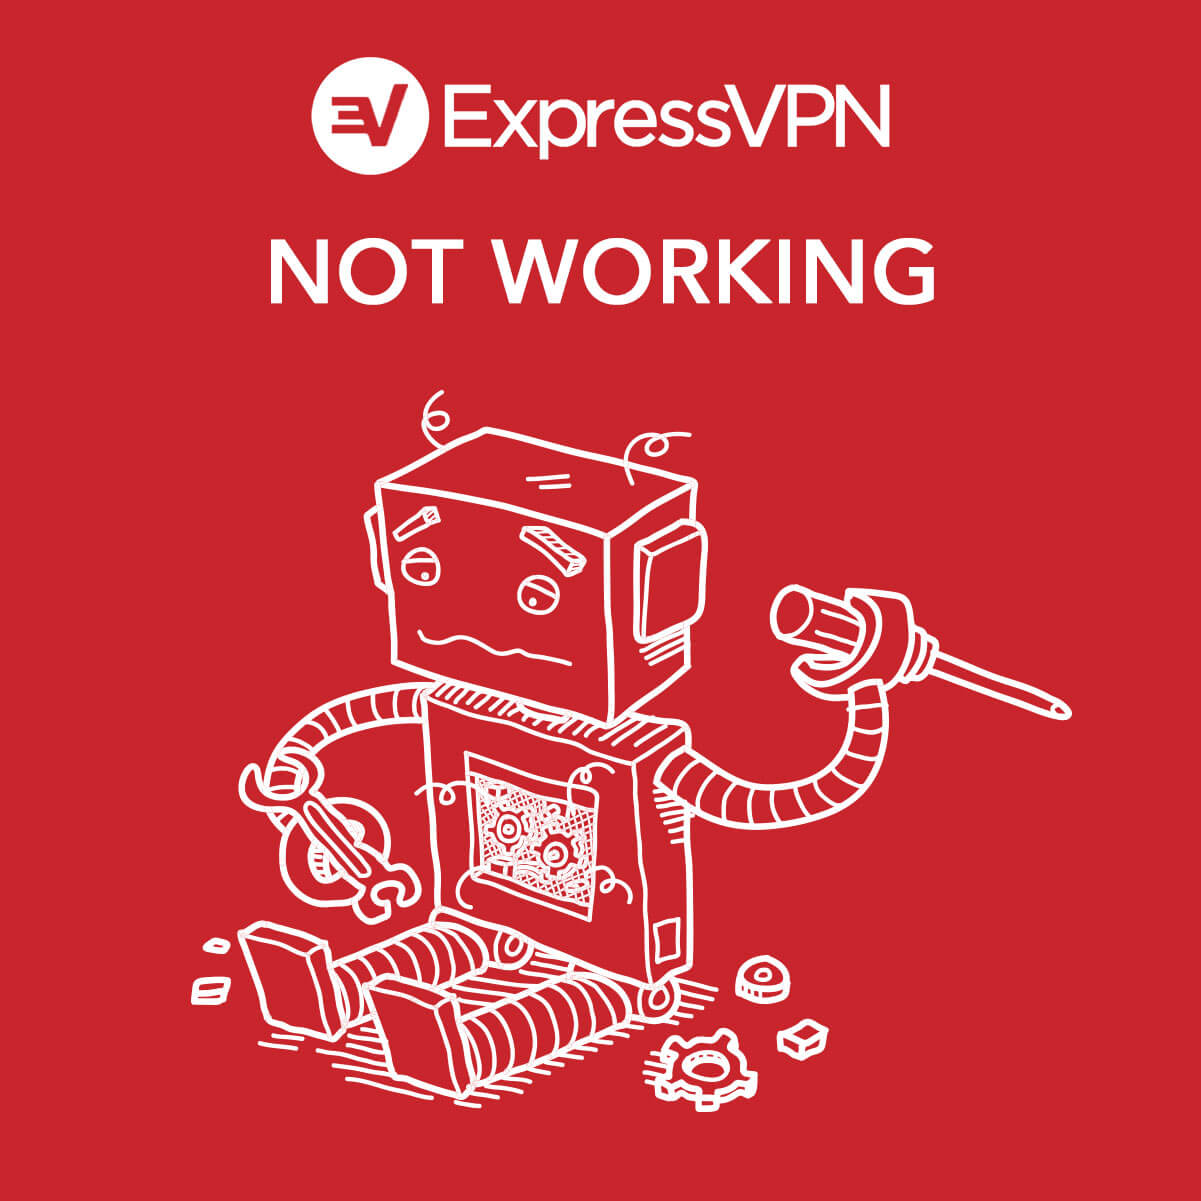 express vpn stopped working